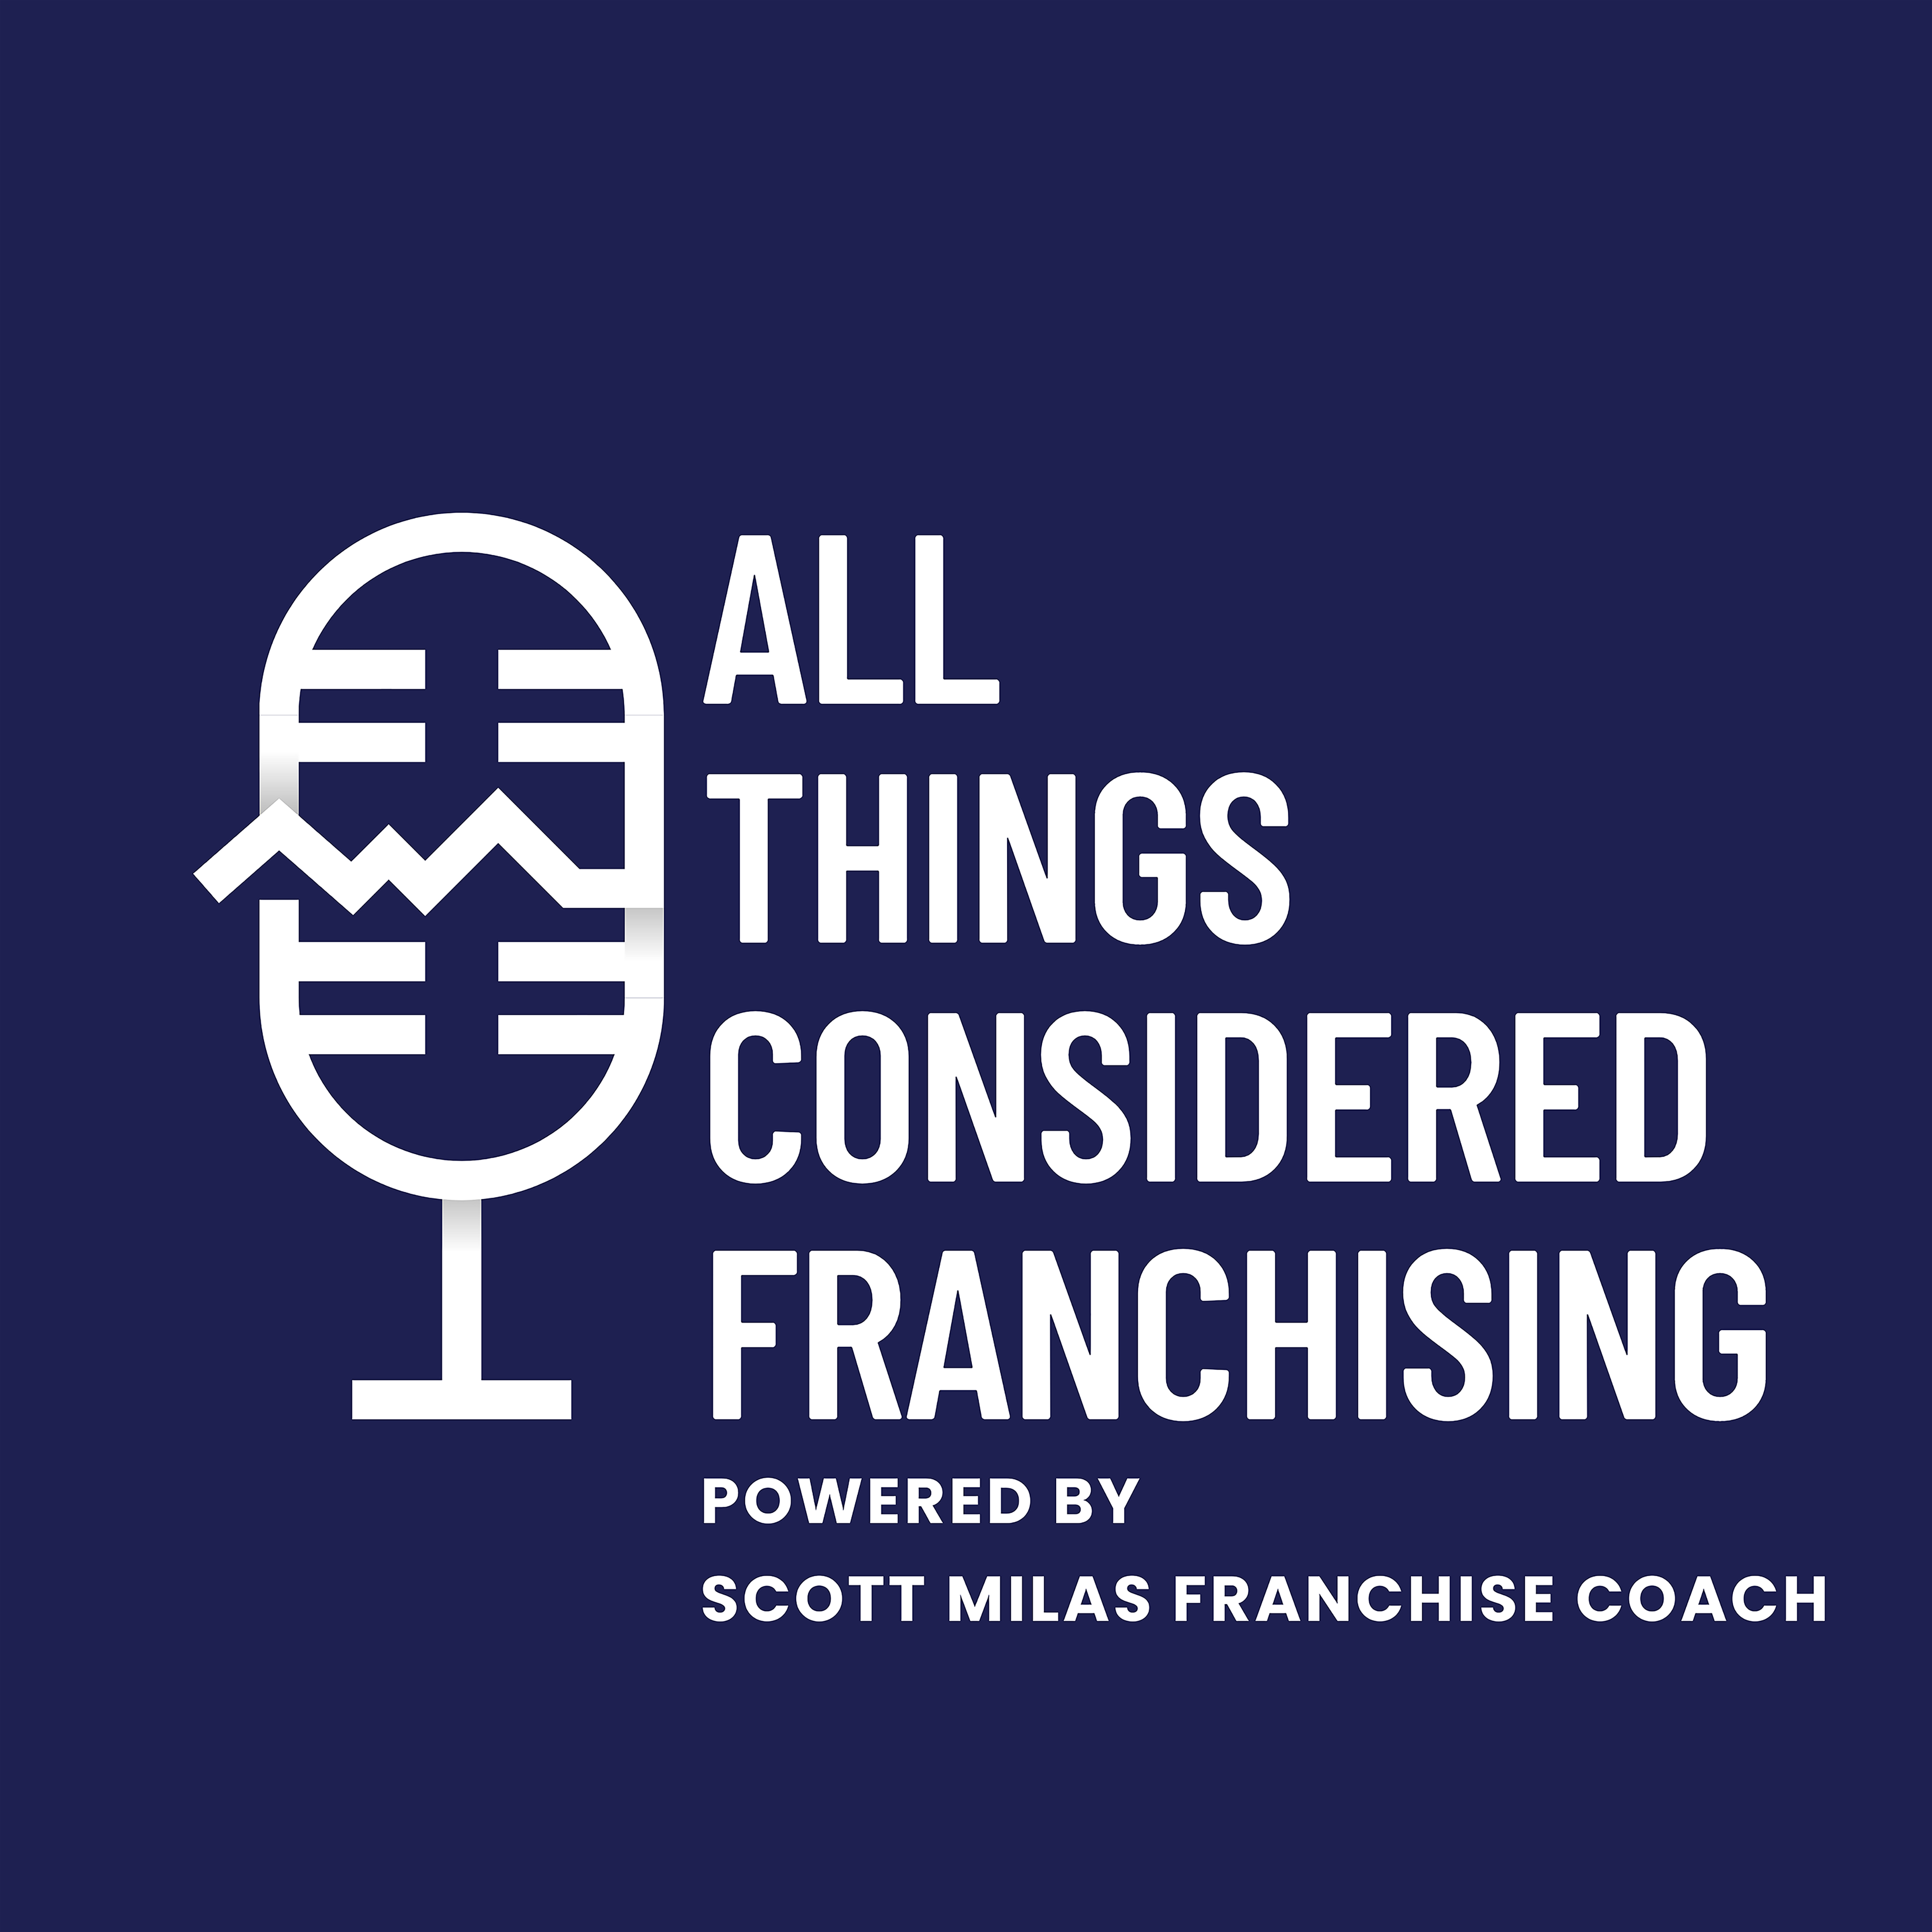 Scotty Milas' All Things Considered Franchising Podcast with Mike Samson of Franchise Fastlane